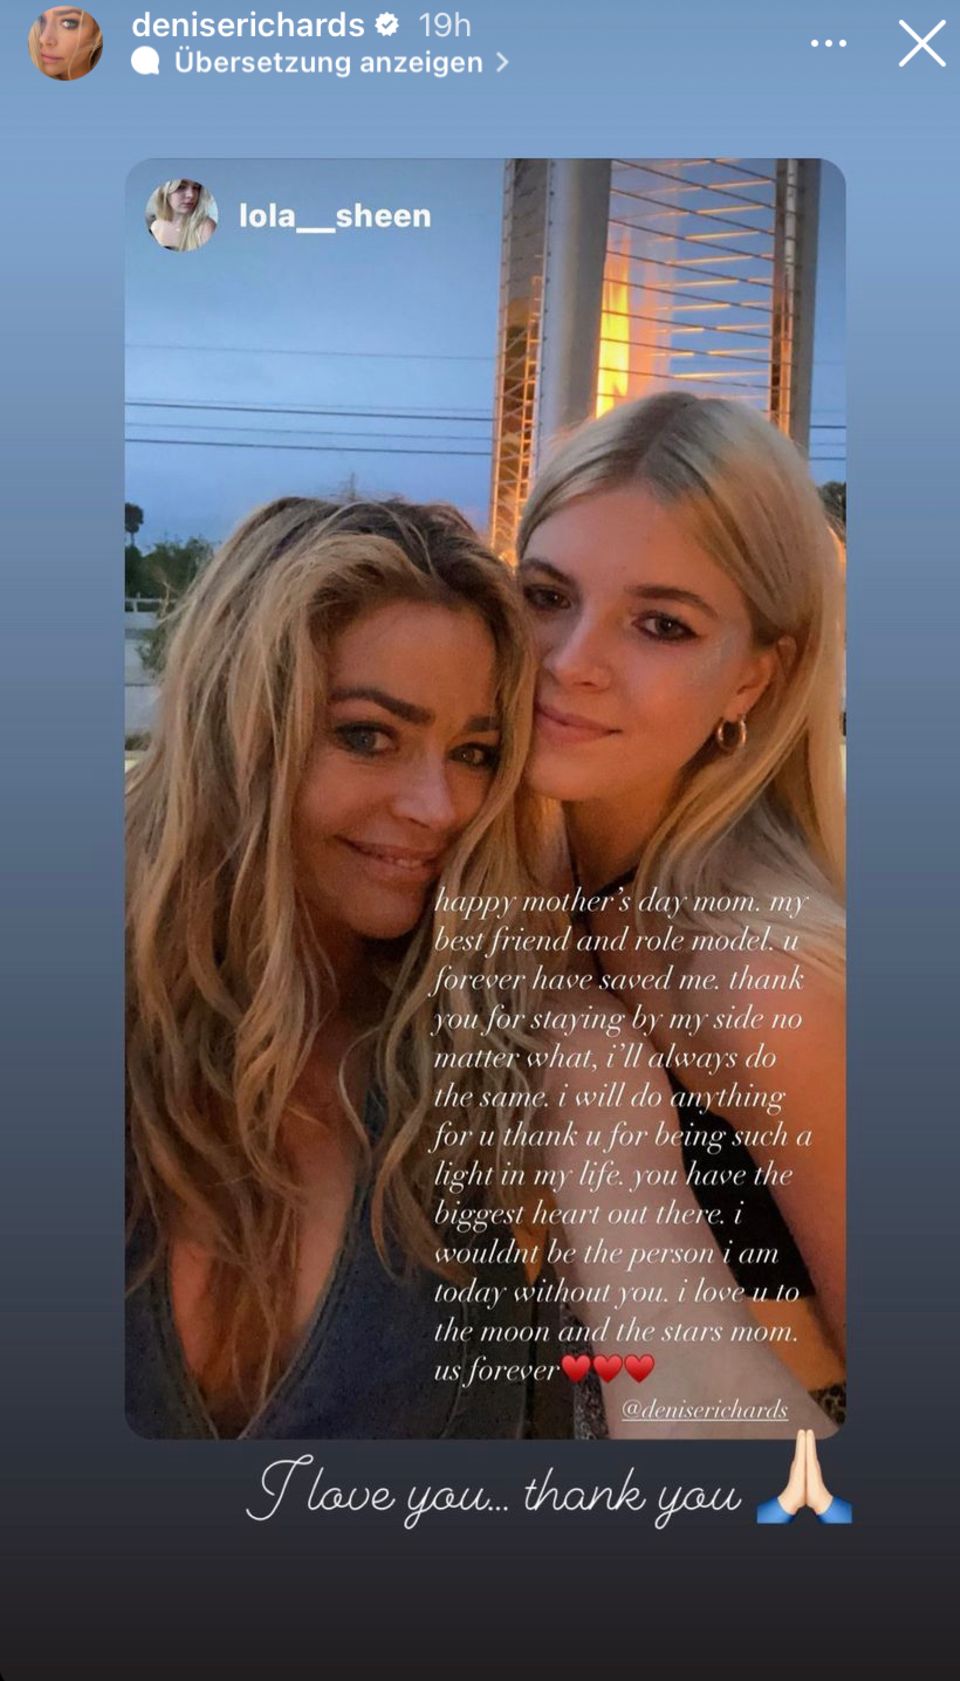 Denise Richards' estranged daughter spends Mother's Day with her